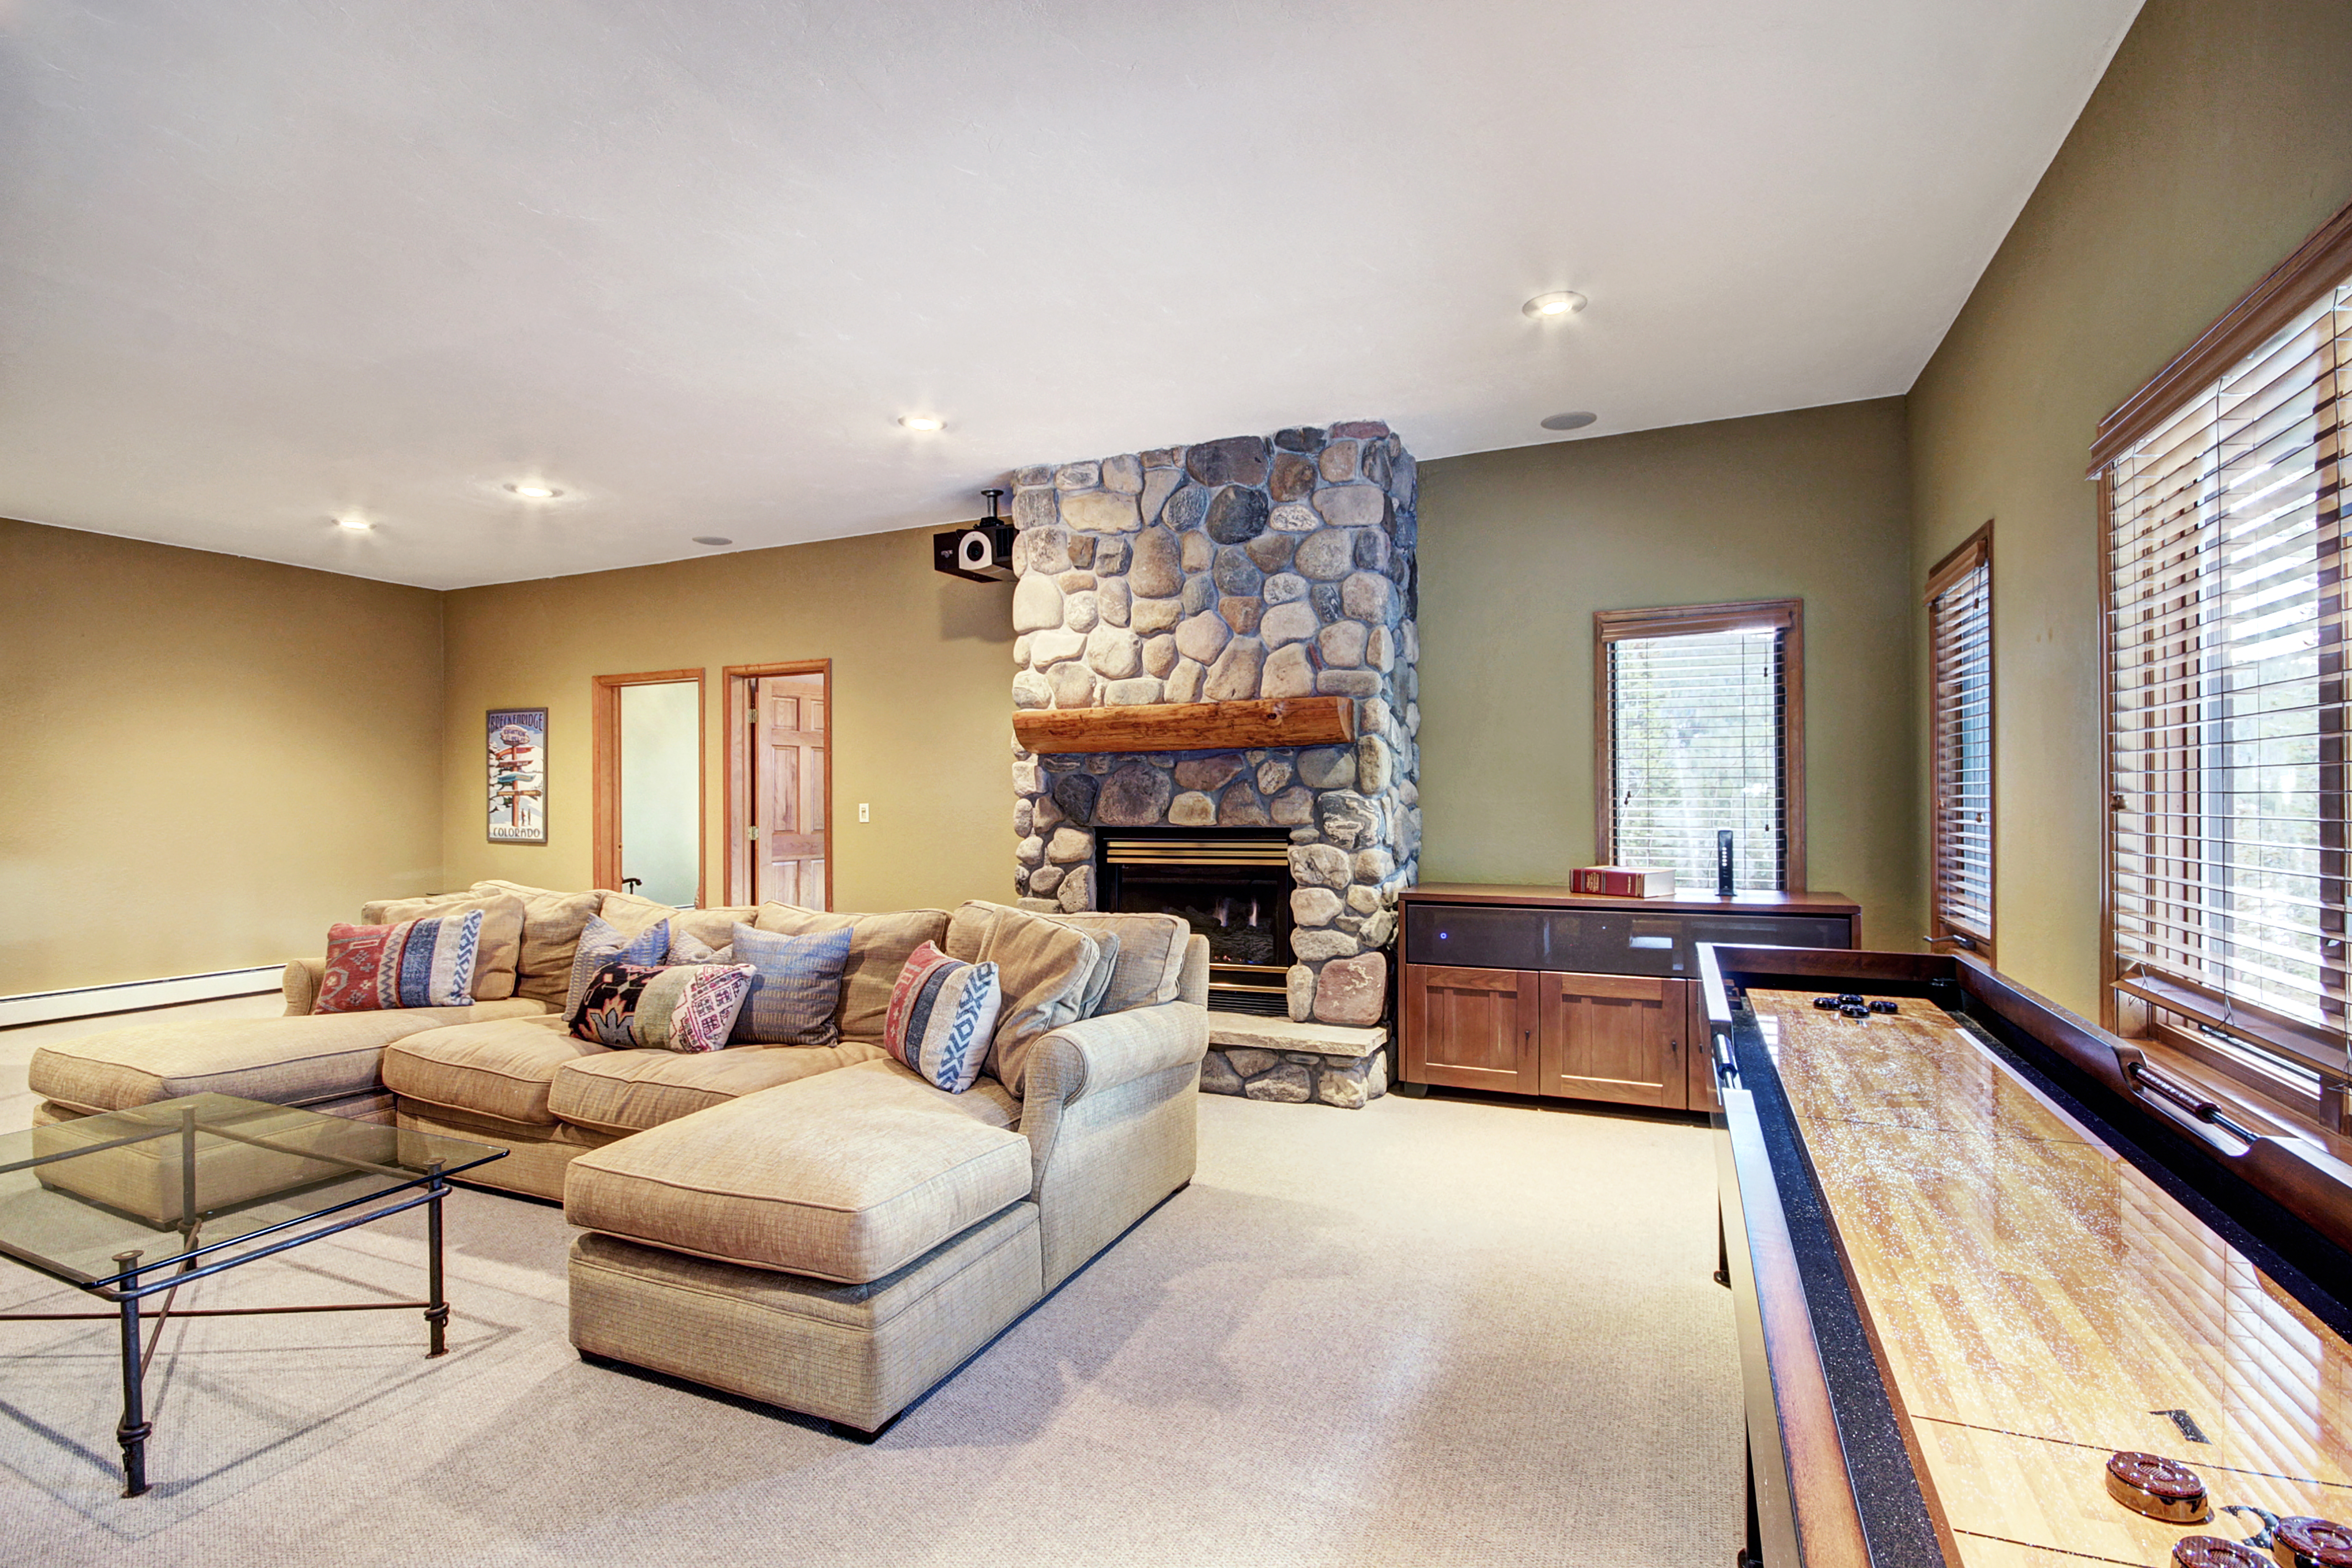 Play shuffleboard or warm by the gas fireplace - 10 Southface Breckenridge Vacation Rental